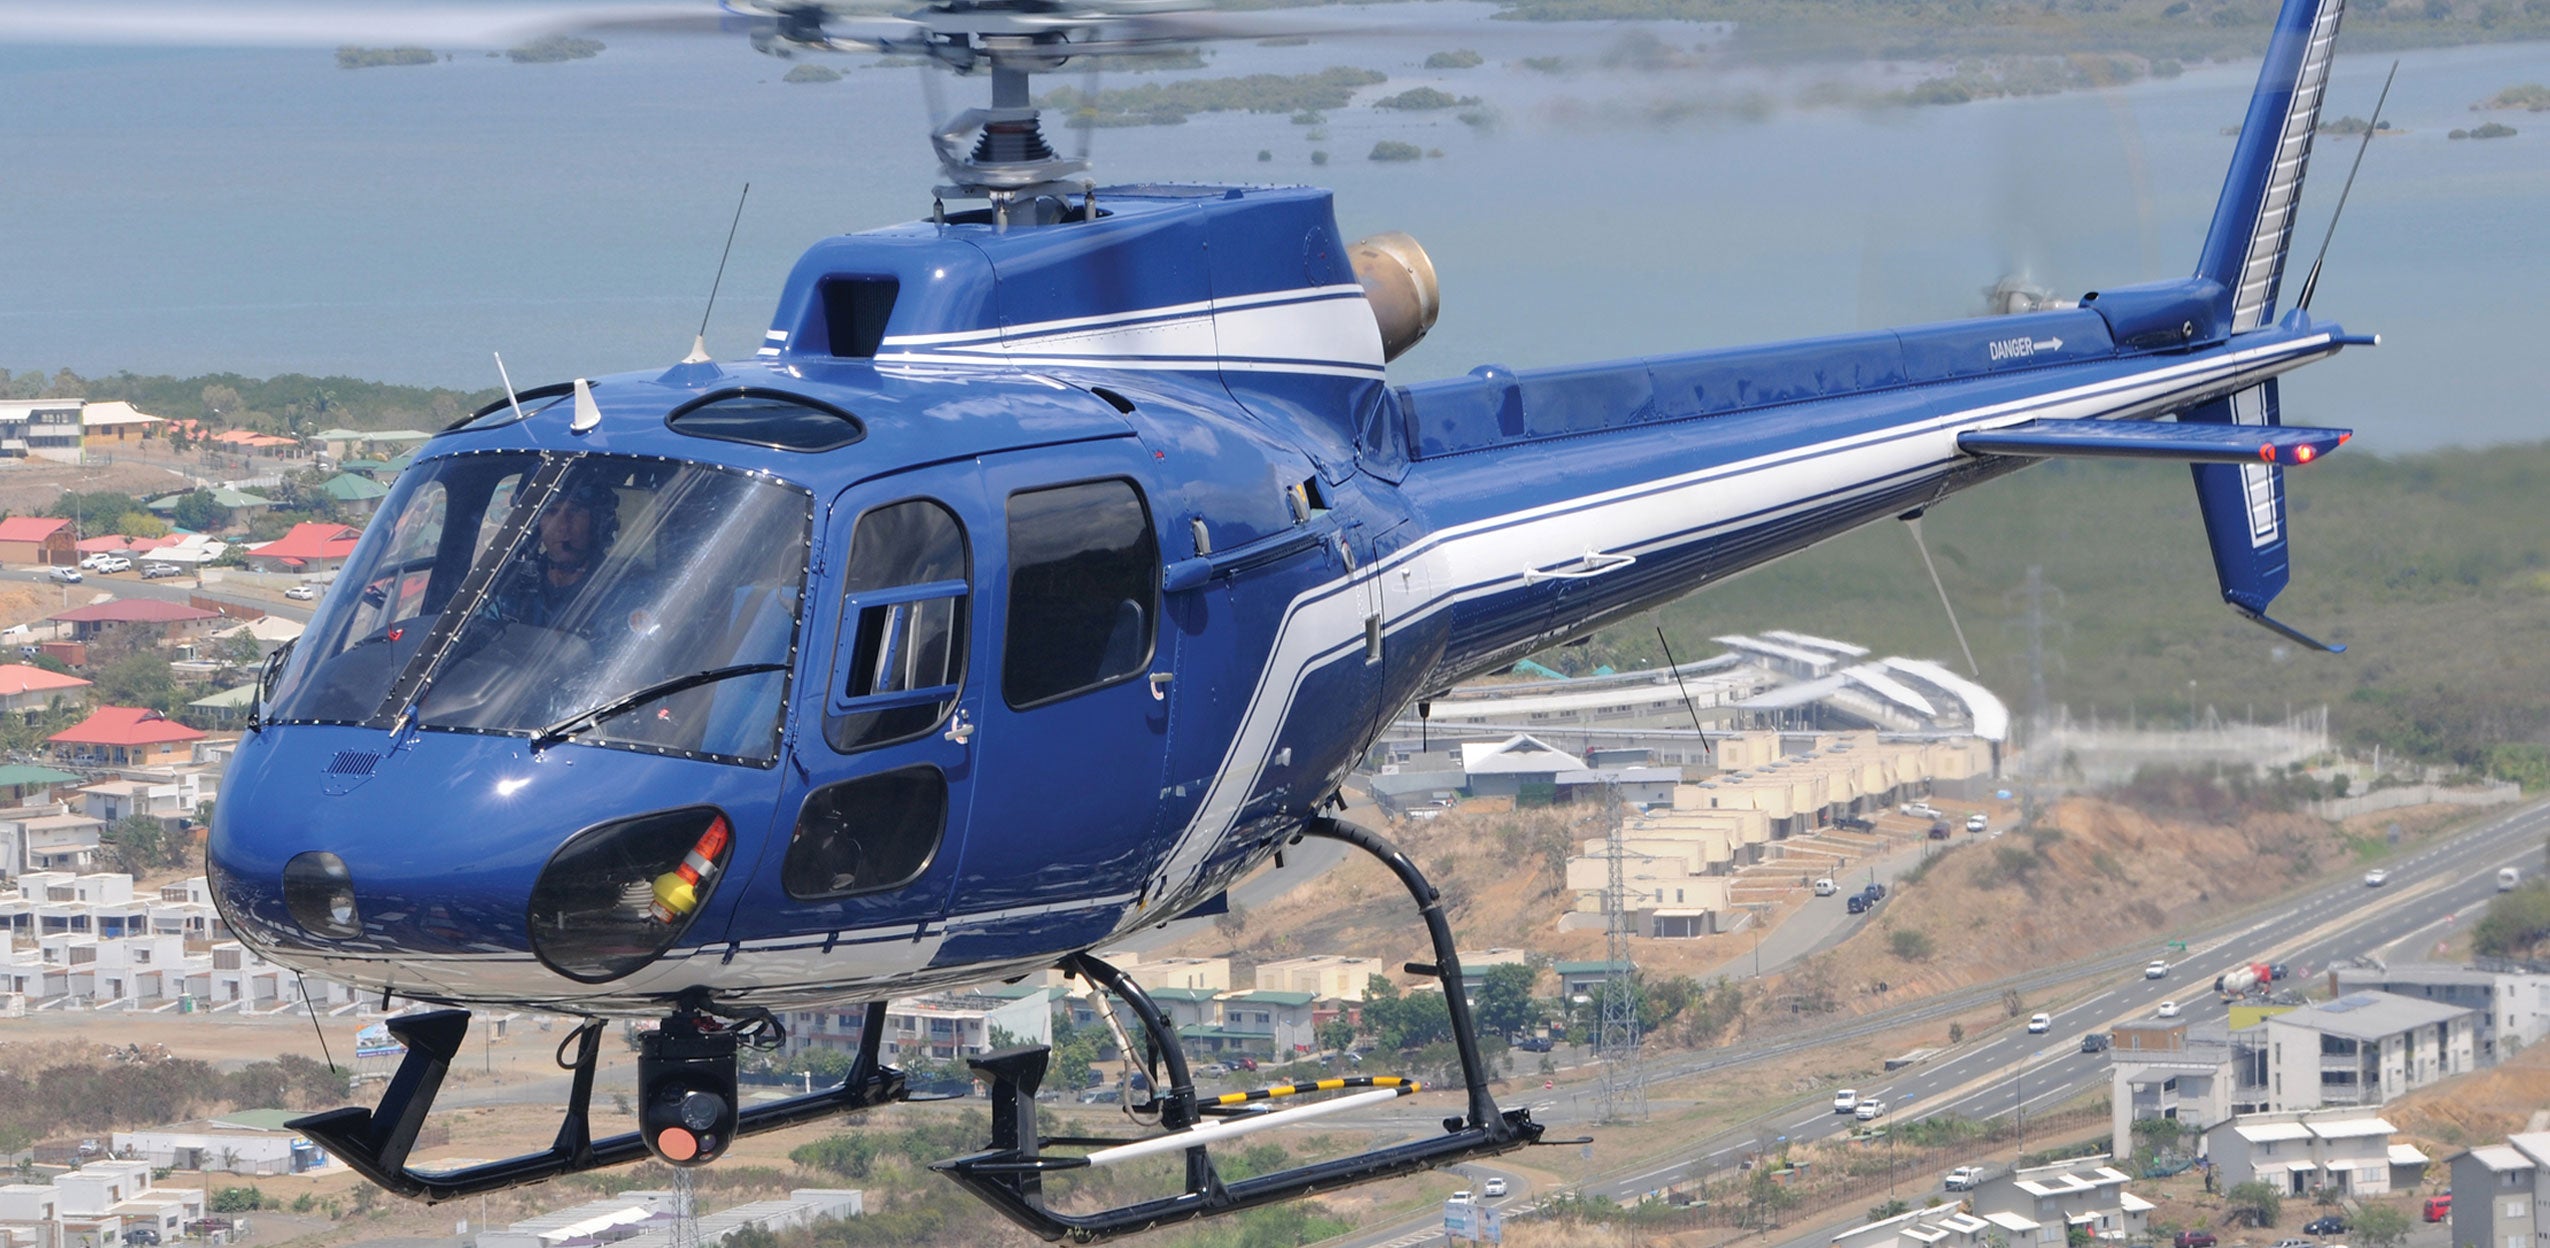 Helicopter flying above a city with a WESCAM MX-Series system mounted on the underbelly